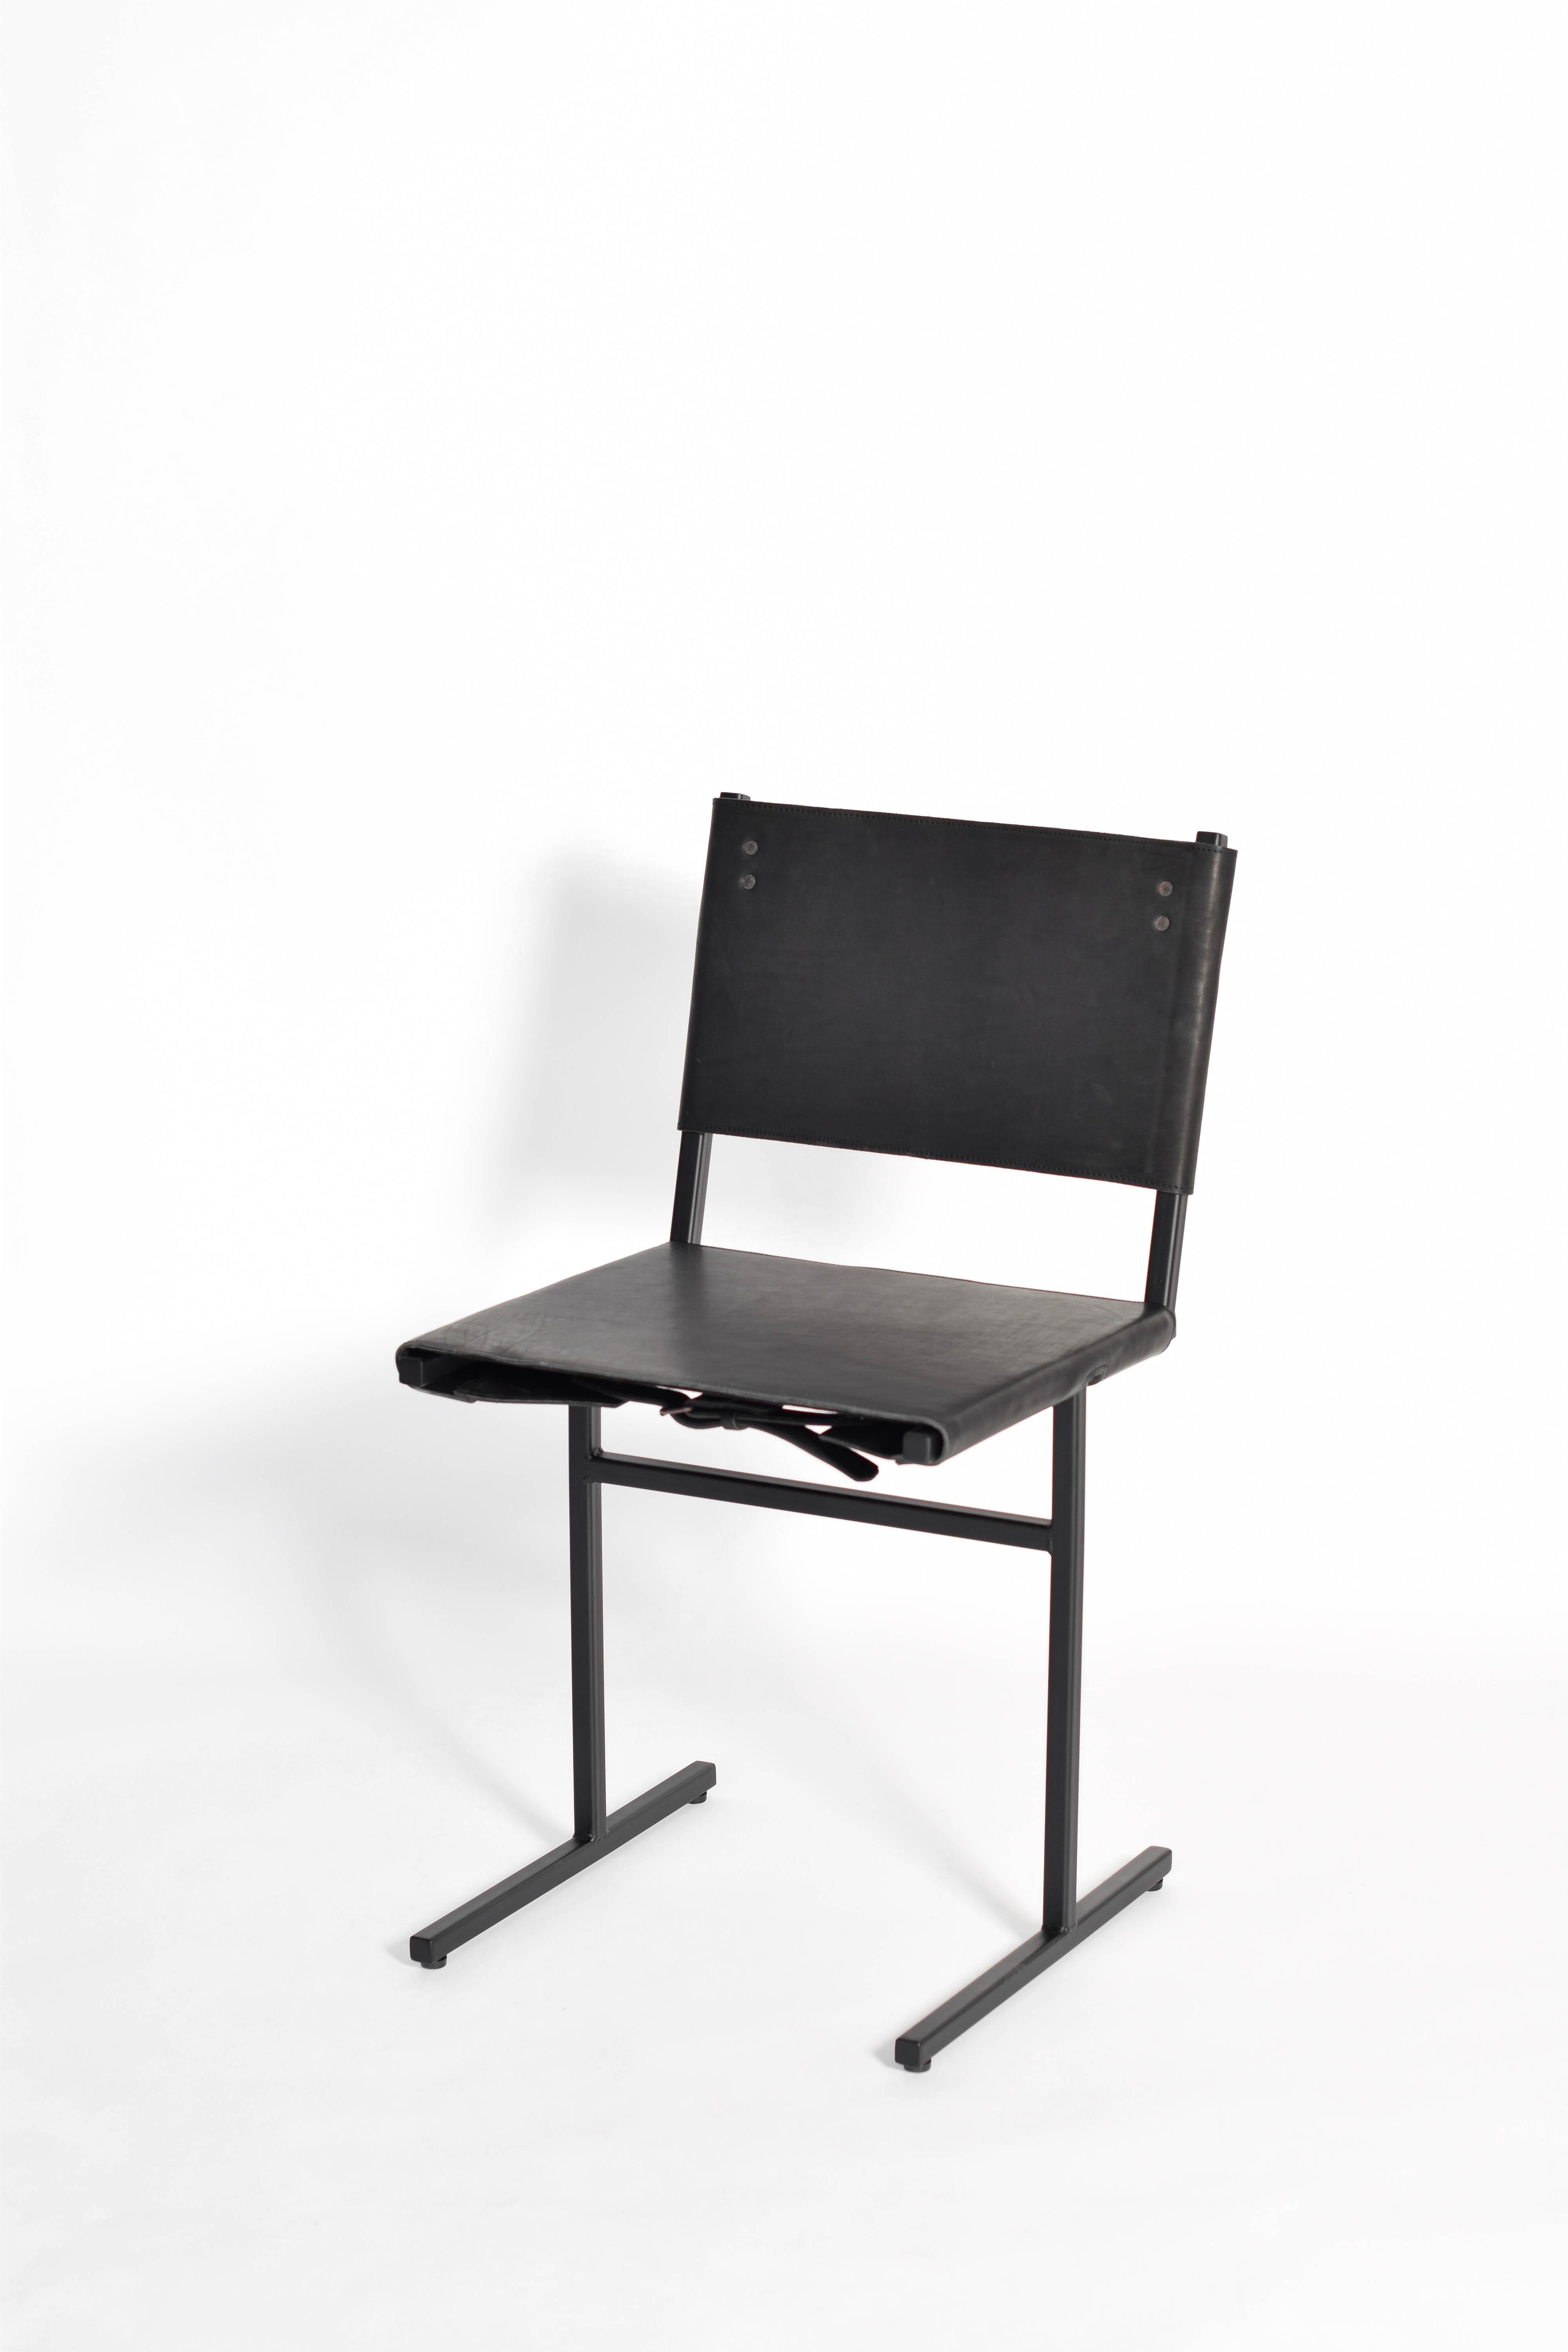 Black Memento chair, Jesse Sanderson
Original signed chair by Jesse Sanderson
Materials: Leather, steel
Dimensions: W 43 x D 50 x H 80 cm 
 Seating height: 47 cm

Frame finishes available in brass, bare steel, matt black.

Five lines and a